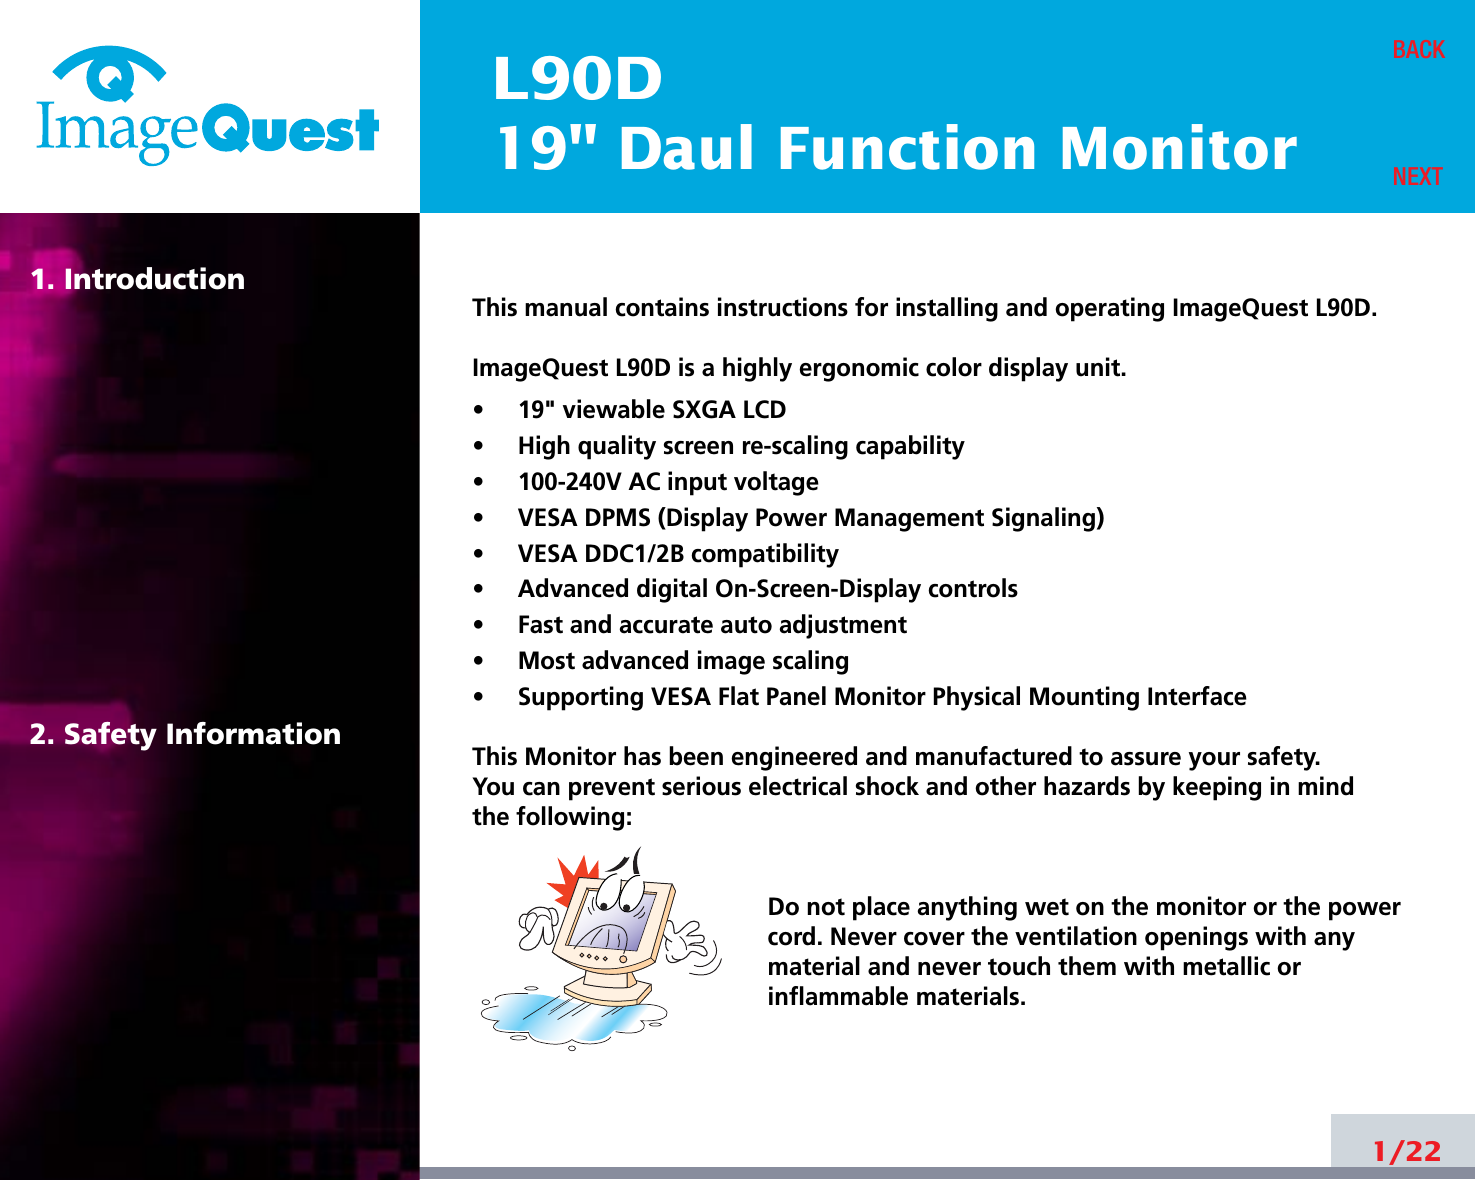 L90D19&quot; Daul Function Monitor1. Introduction2. Safety Information1/22BACKNEXTThis manual contains instructions for installing and operating ImageQuest L90D.ImageQuest L90D is a highly ergonomic color display unit.•     19&quot; viewable SXGA LCD•     High quality screen re-scaling capability•     100-240V AC input voltage•     VESA DPMS (Display Power Management Signaling)•     VESA DDC1/2B compatibility•     Advanced digital On-Screen-Display controls•     Fast and accurate auto adjustment  •     Most advanced image scaling•     Supporting VESA Flat Panel Monitor Physical Mounting InterfaceThis Monitor has been engineered and manufactured to assure your safety. You can prevent serious electrical shock and other hazards by keeping in mind the following:Do not place anything wet on the monitor or the powercord. Never cover the ventilation openings with anymaterial and never touch them with metallic or inflammable materials.